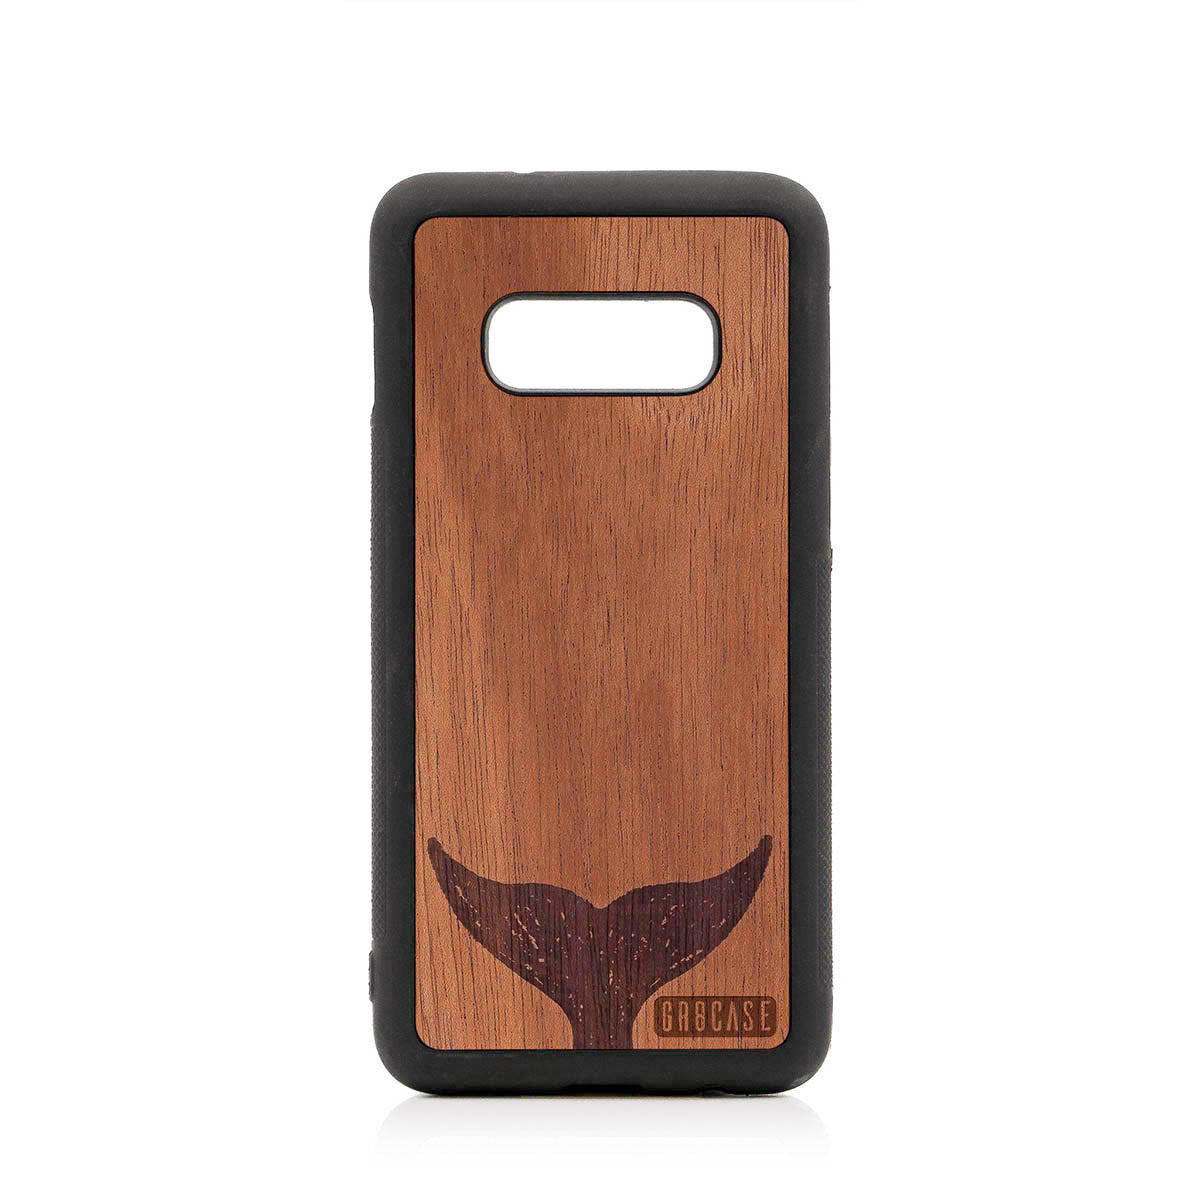 Whale Tail Design Wood Case For Samsung Galaxy S10E